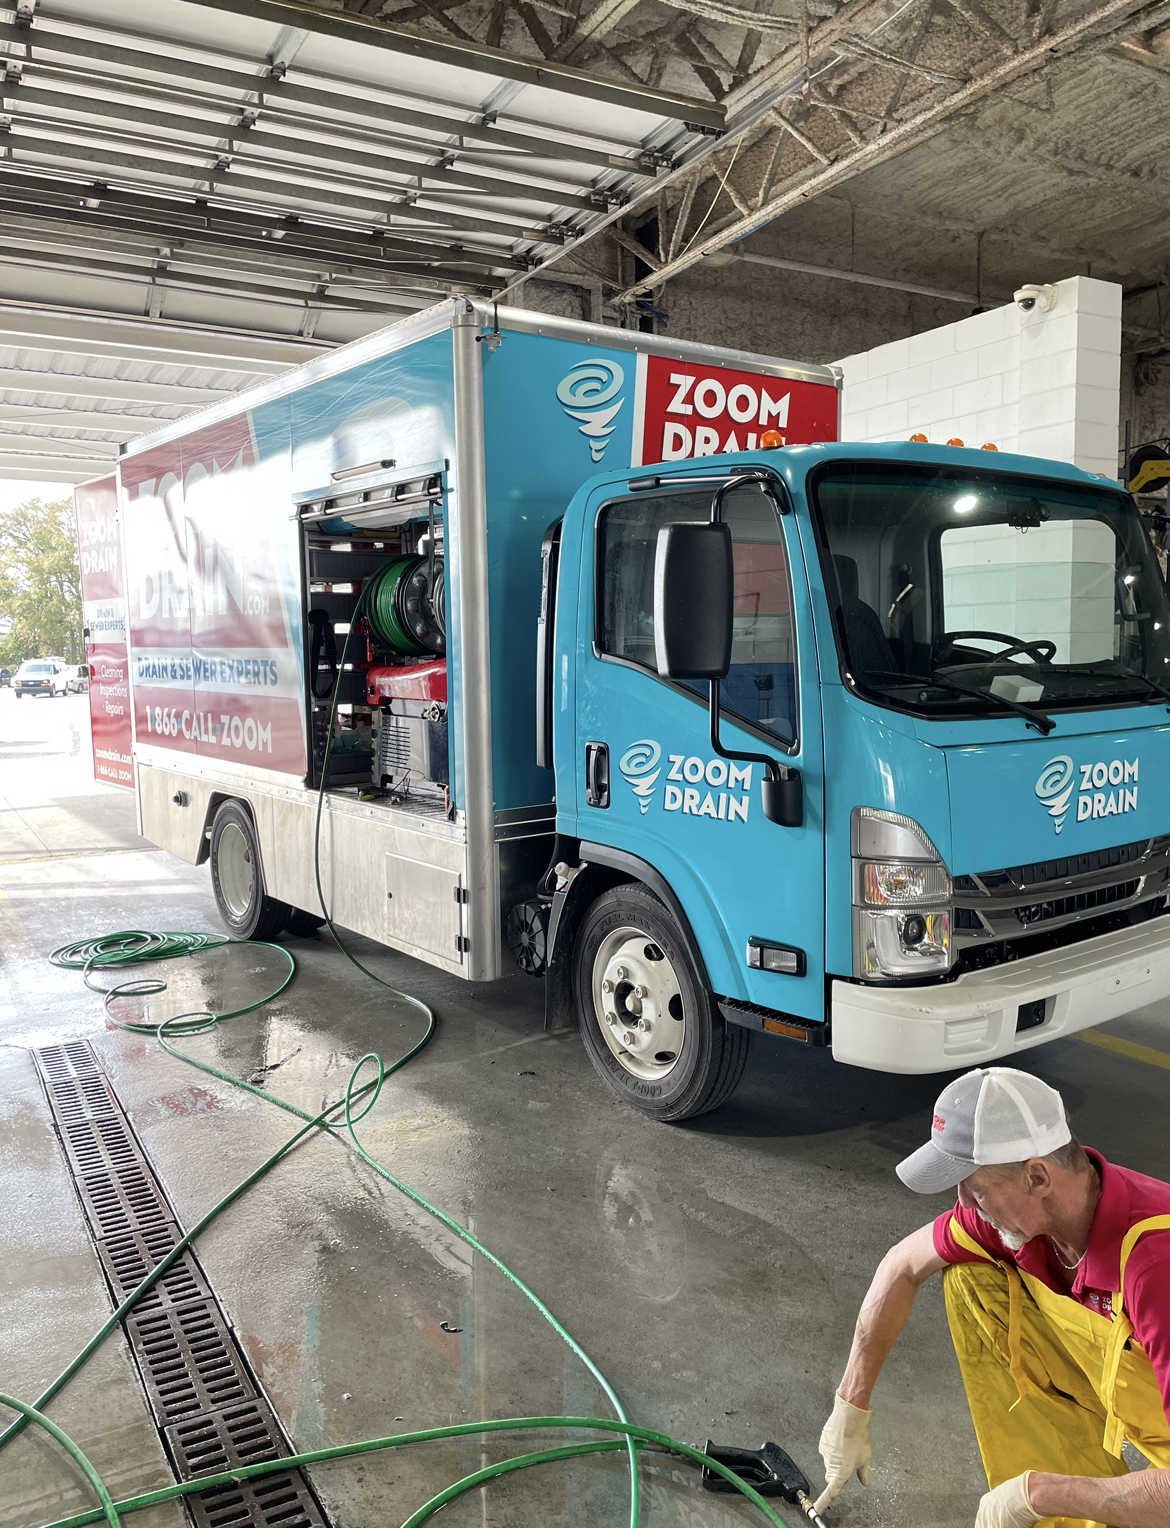 Image of Zoom Drain Employee and Zoom Drain truck